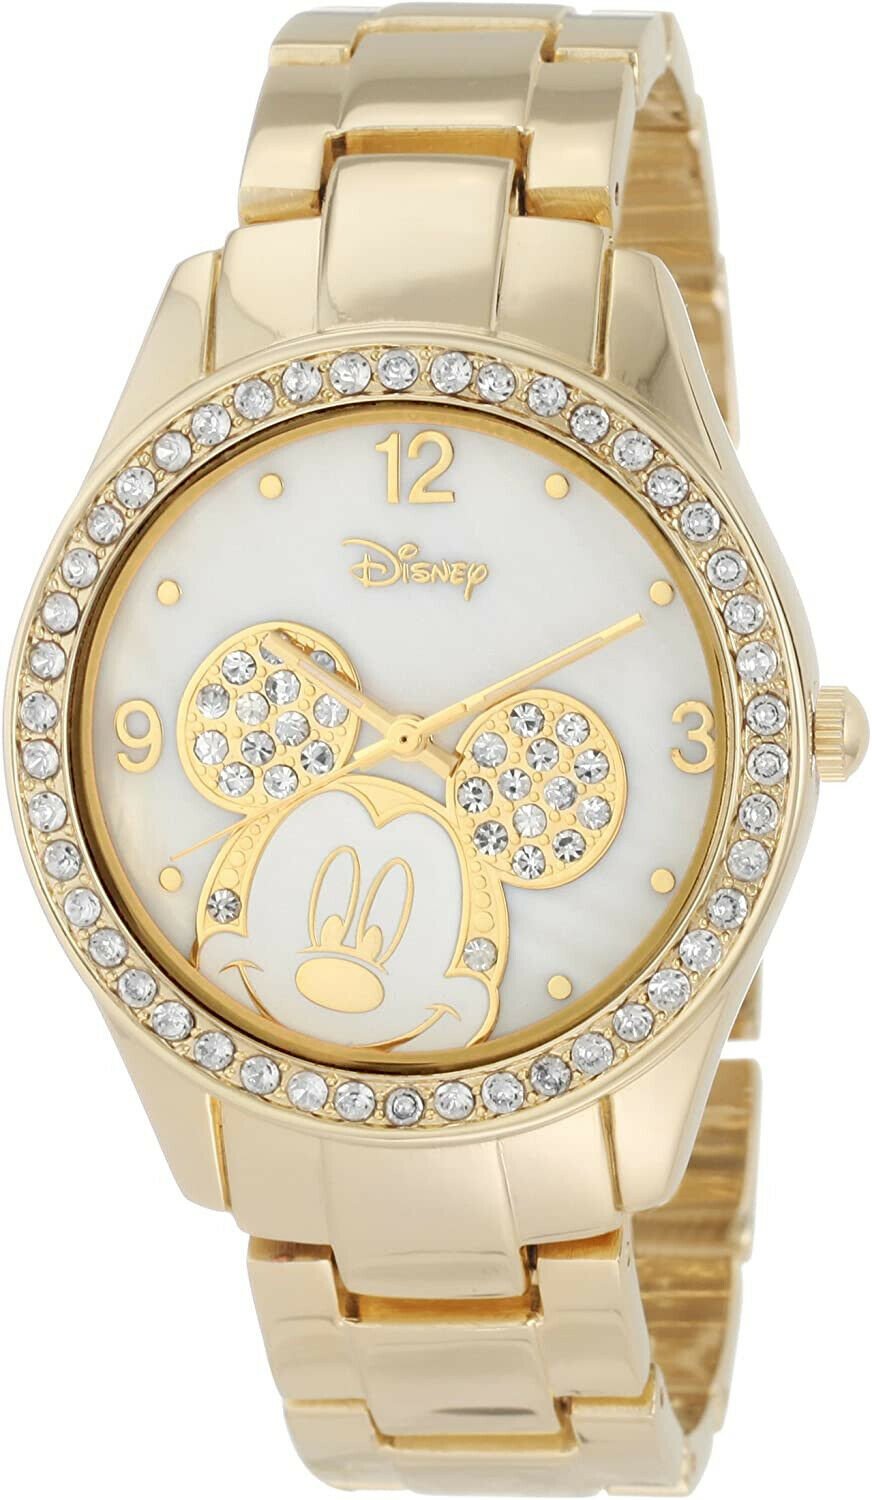 Model: Women's Disney Mickey Mouse Watch with  Rhinestone Accented Gold Tone Bracelet